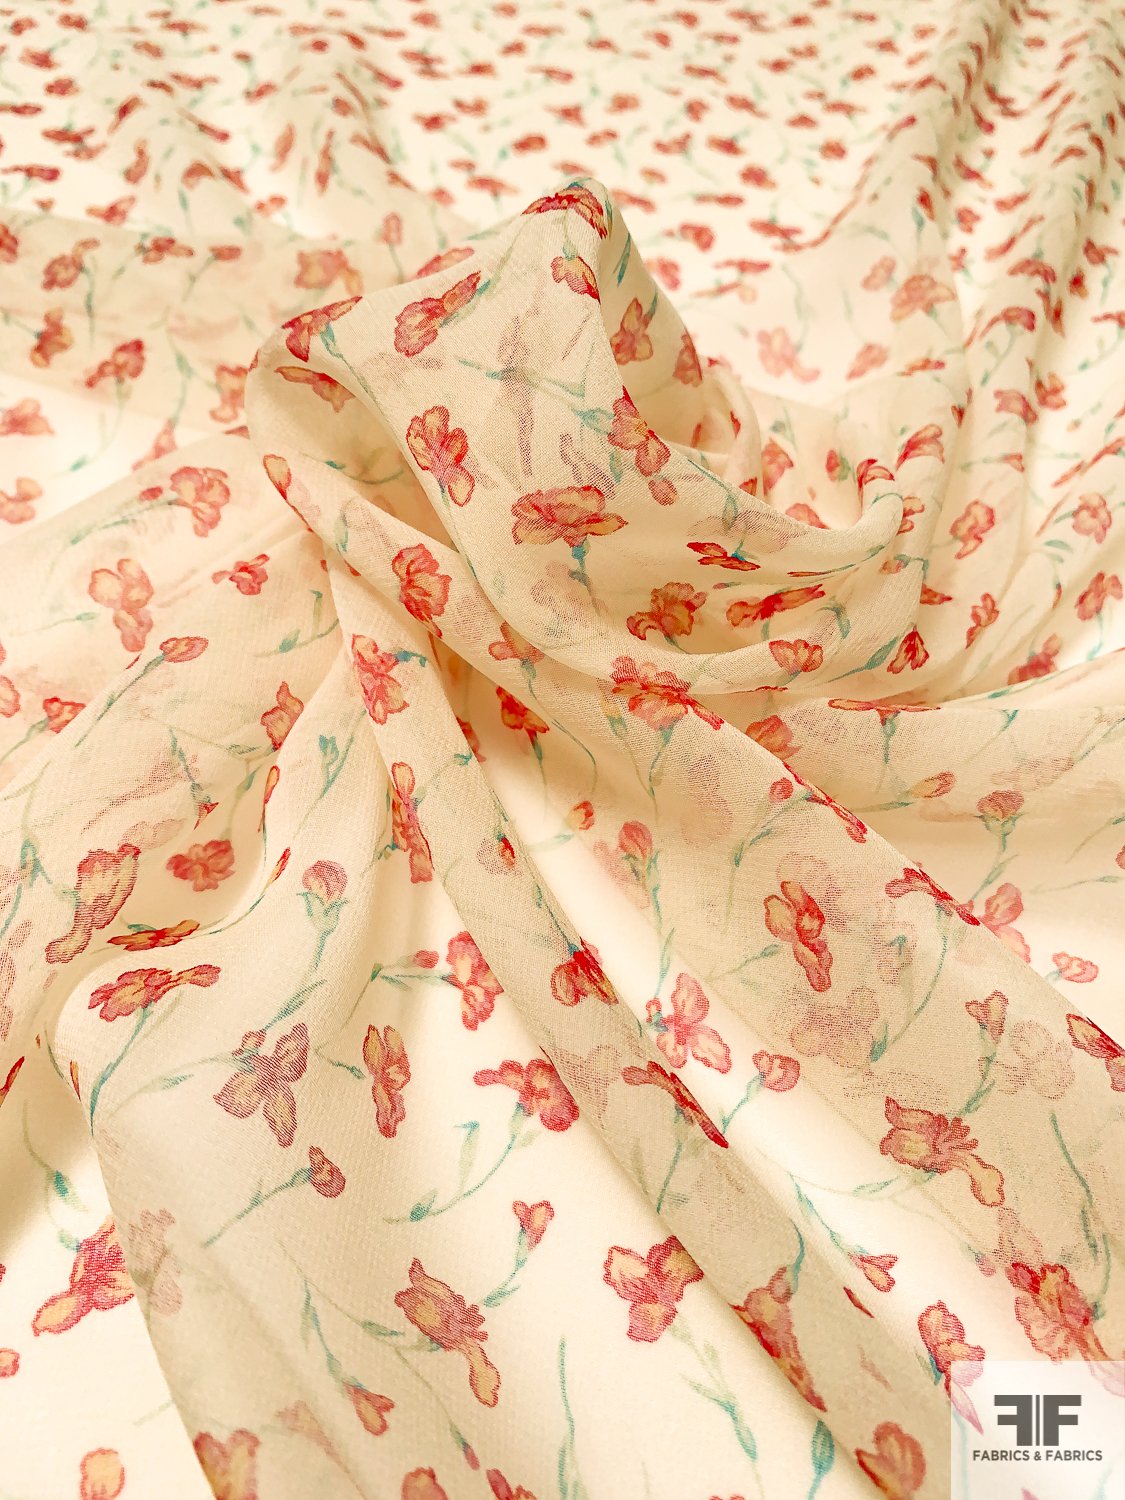 Dainty Floral Printed Silk Chiffon - Ivory / Red / Turquoise